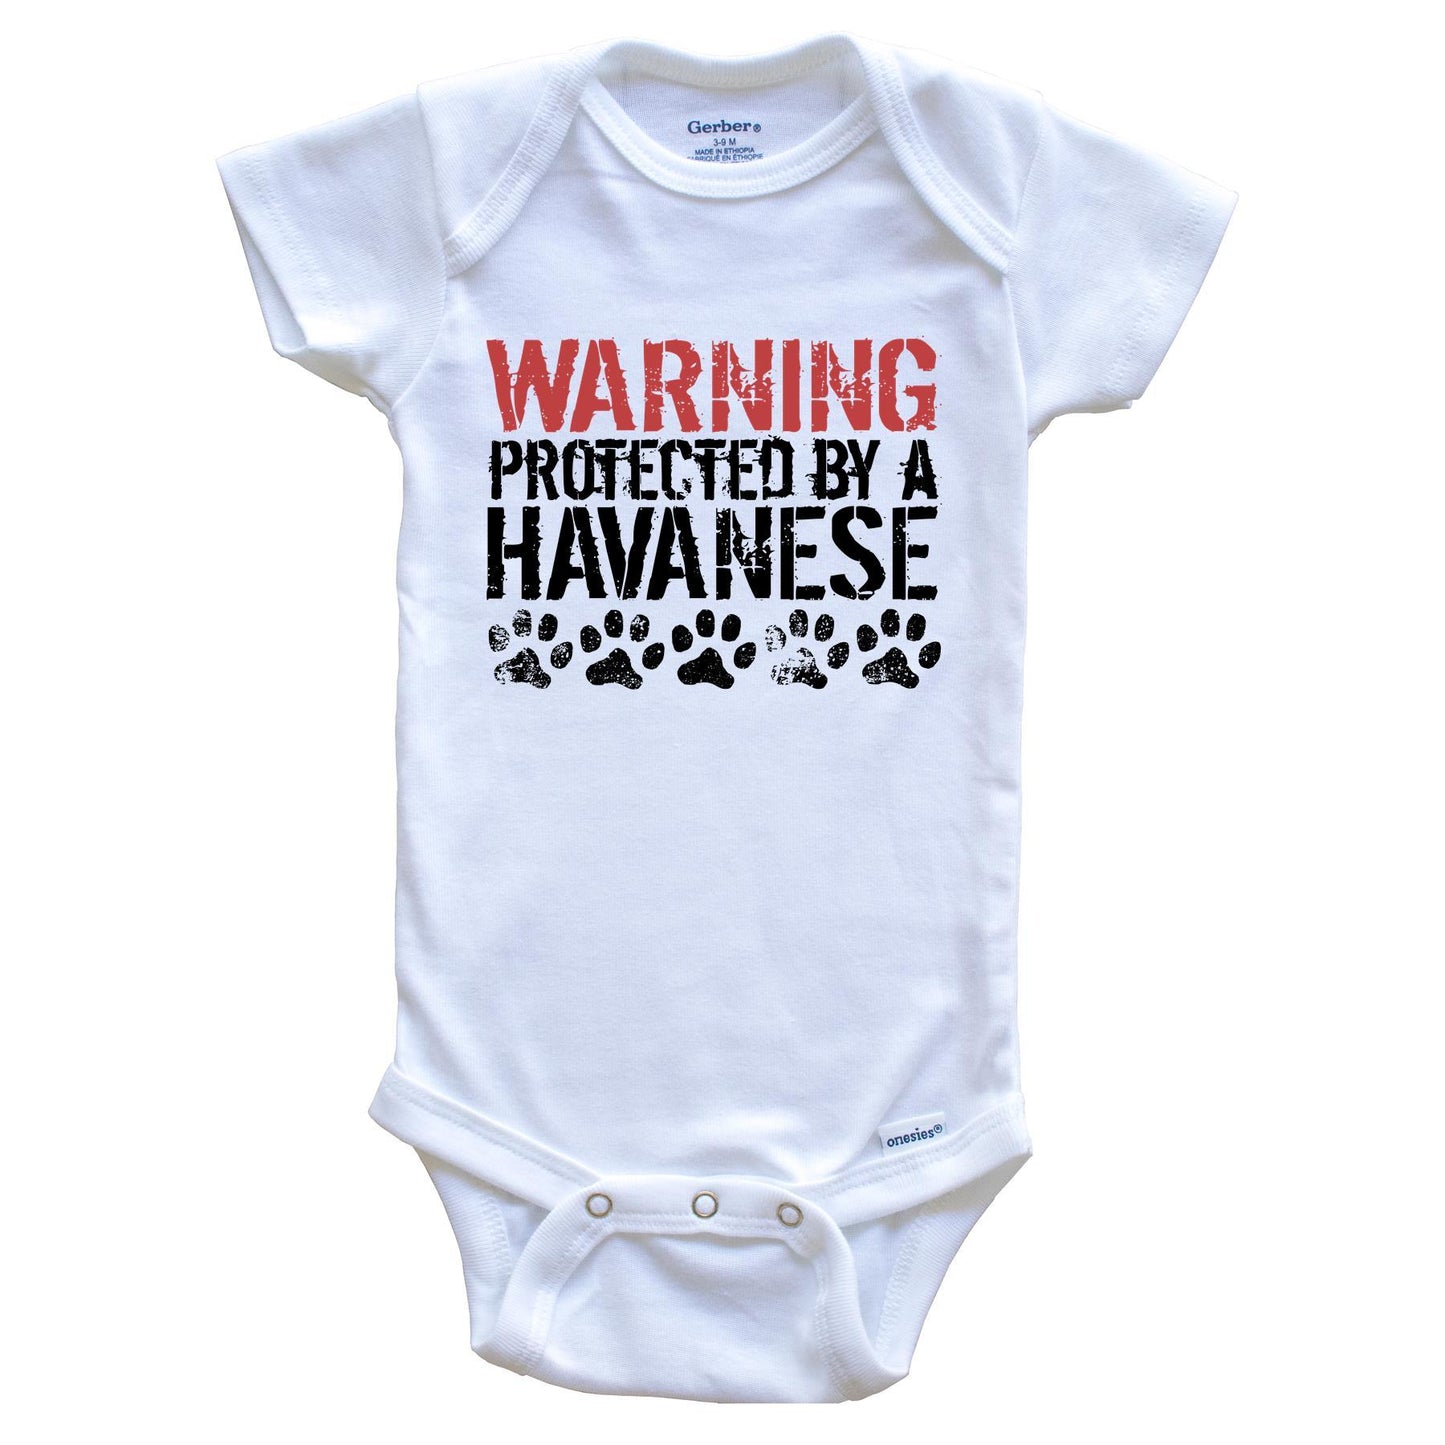 Warning Protected By A Havanese Baby Onesie